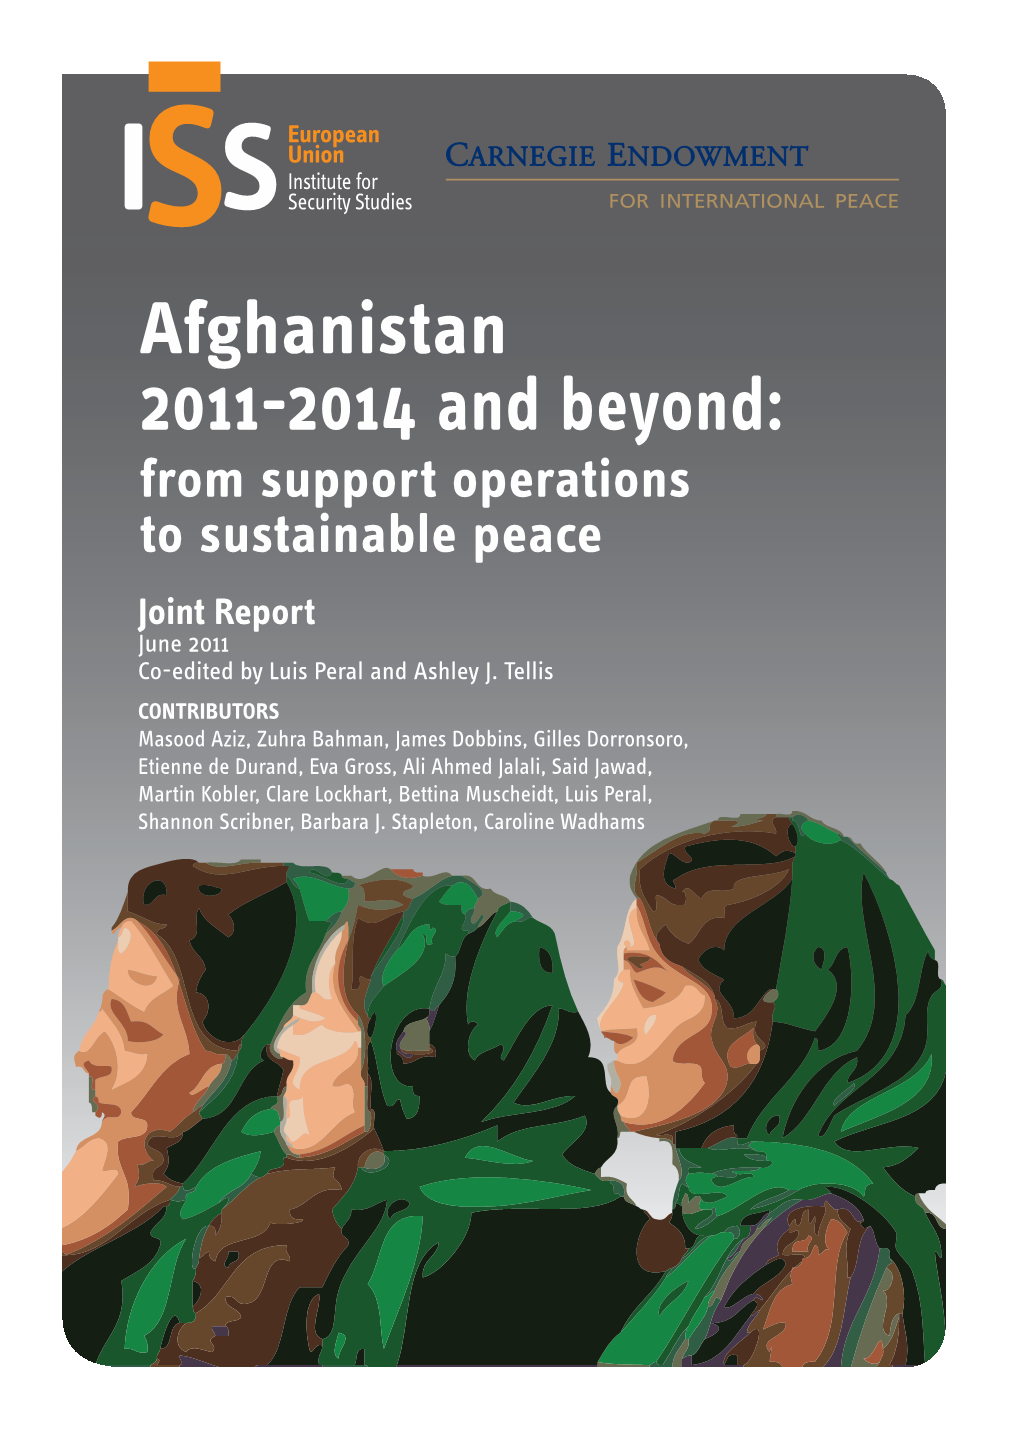 Afghanistan 2011-2014 and Beyond: from Support Operations to Sustainable Peace Joint Report June 2011 Co-Edited by Luis Peral and Ashley J